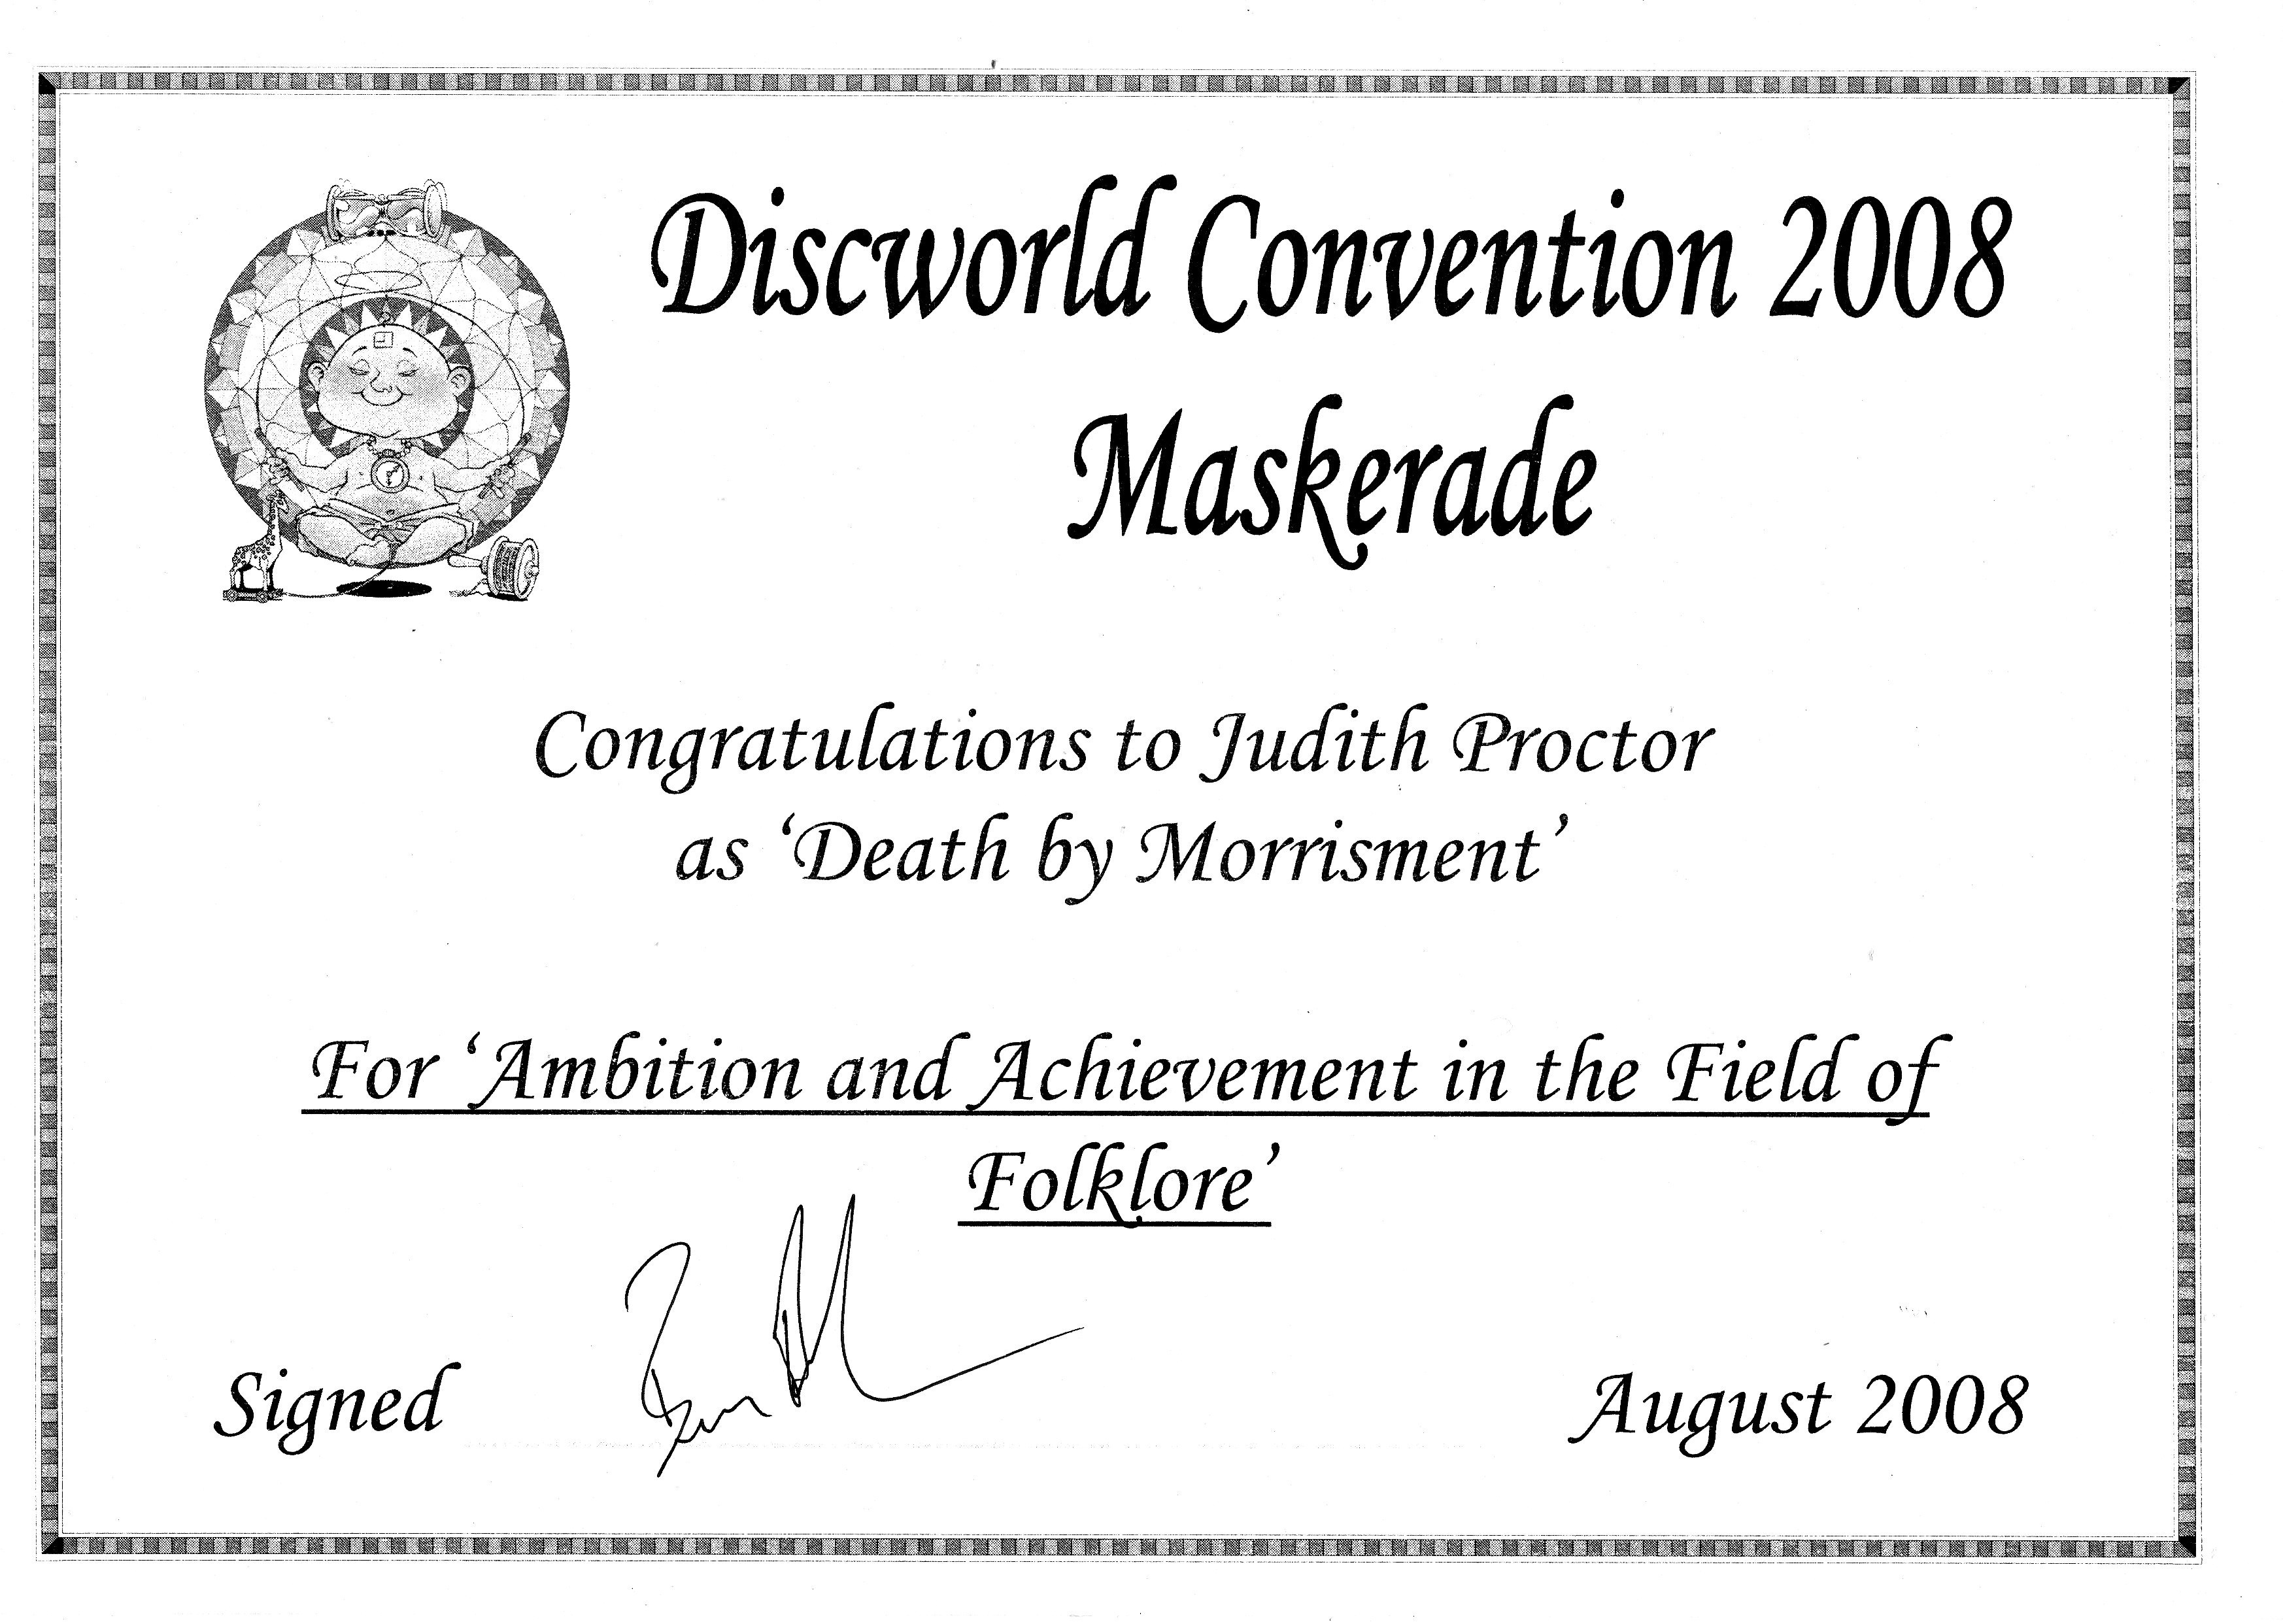 A certificate from the 2008 Discworld Convention presented to Judith Proctor for 'Ambition and Achievement in the Field of Folklore'